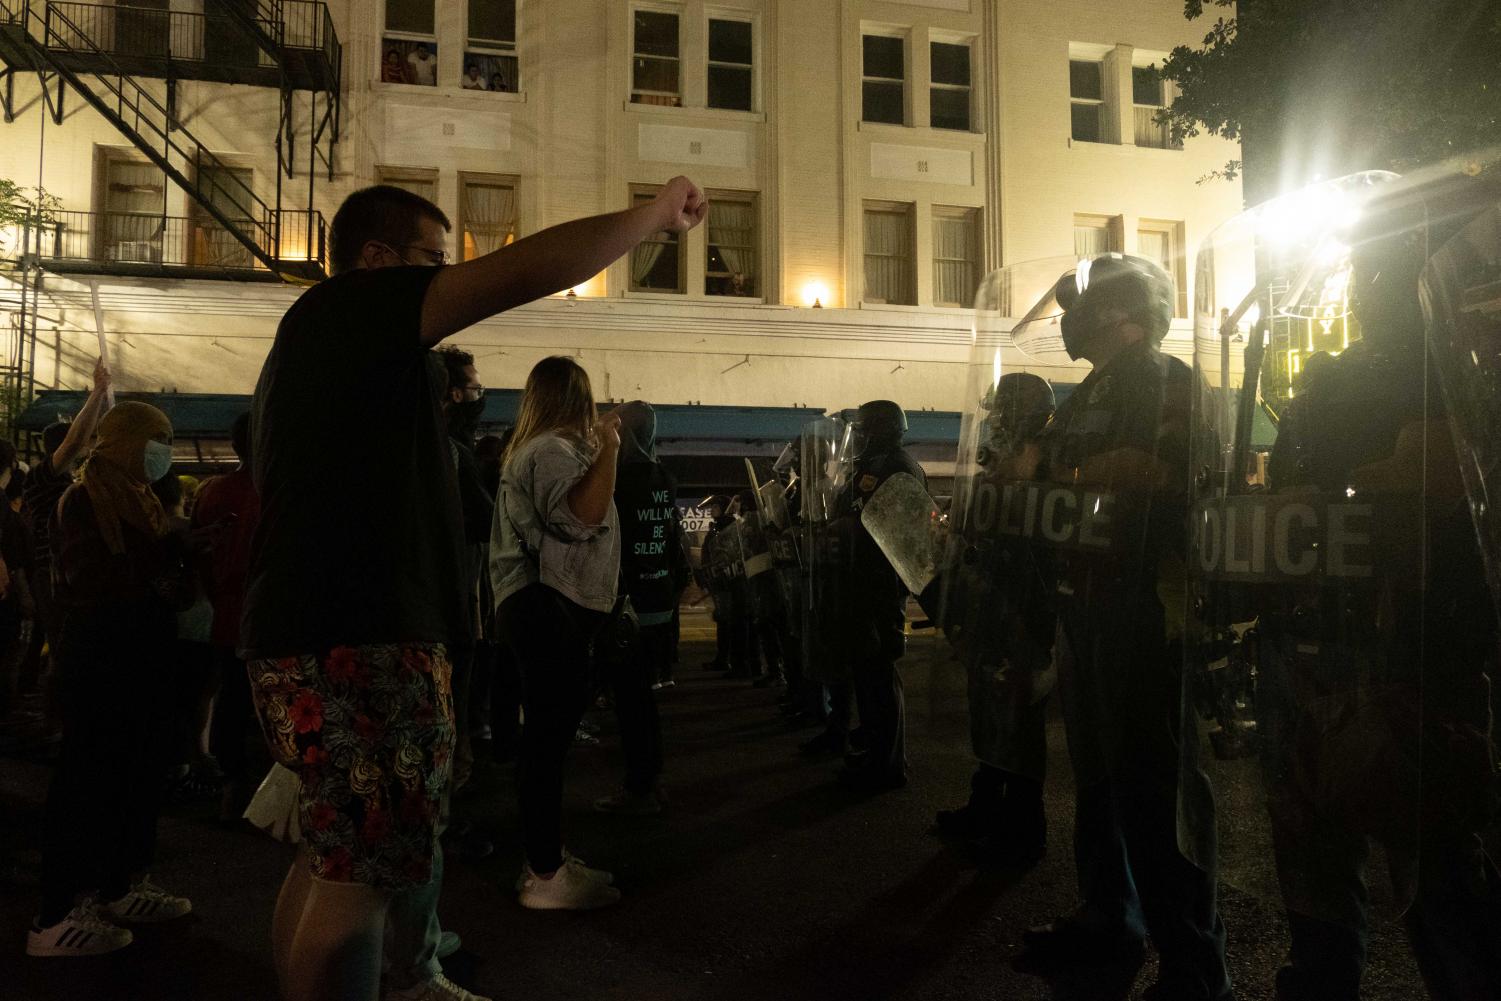 El+Paso+protests+to+denounce+police+brutality+continue